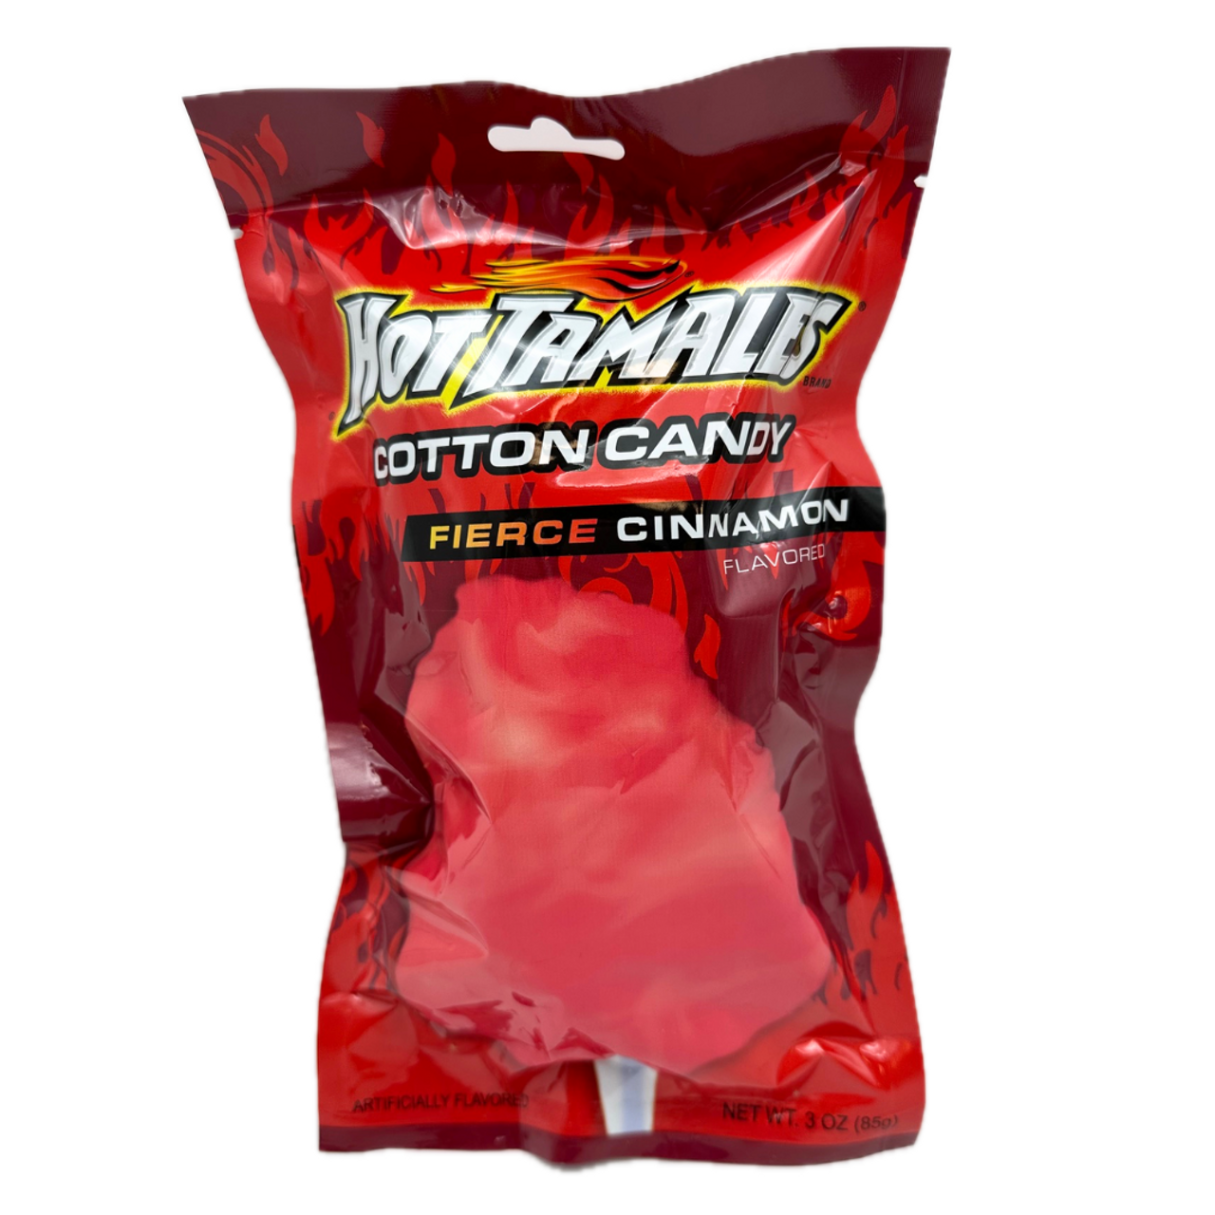 Hot Tamales Cotton Candy  3oz - 12ct